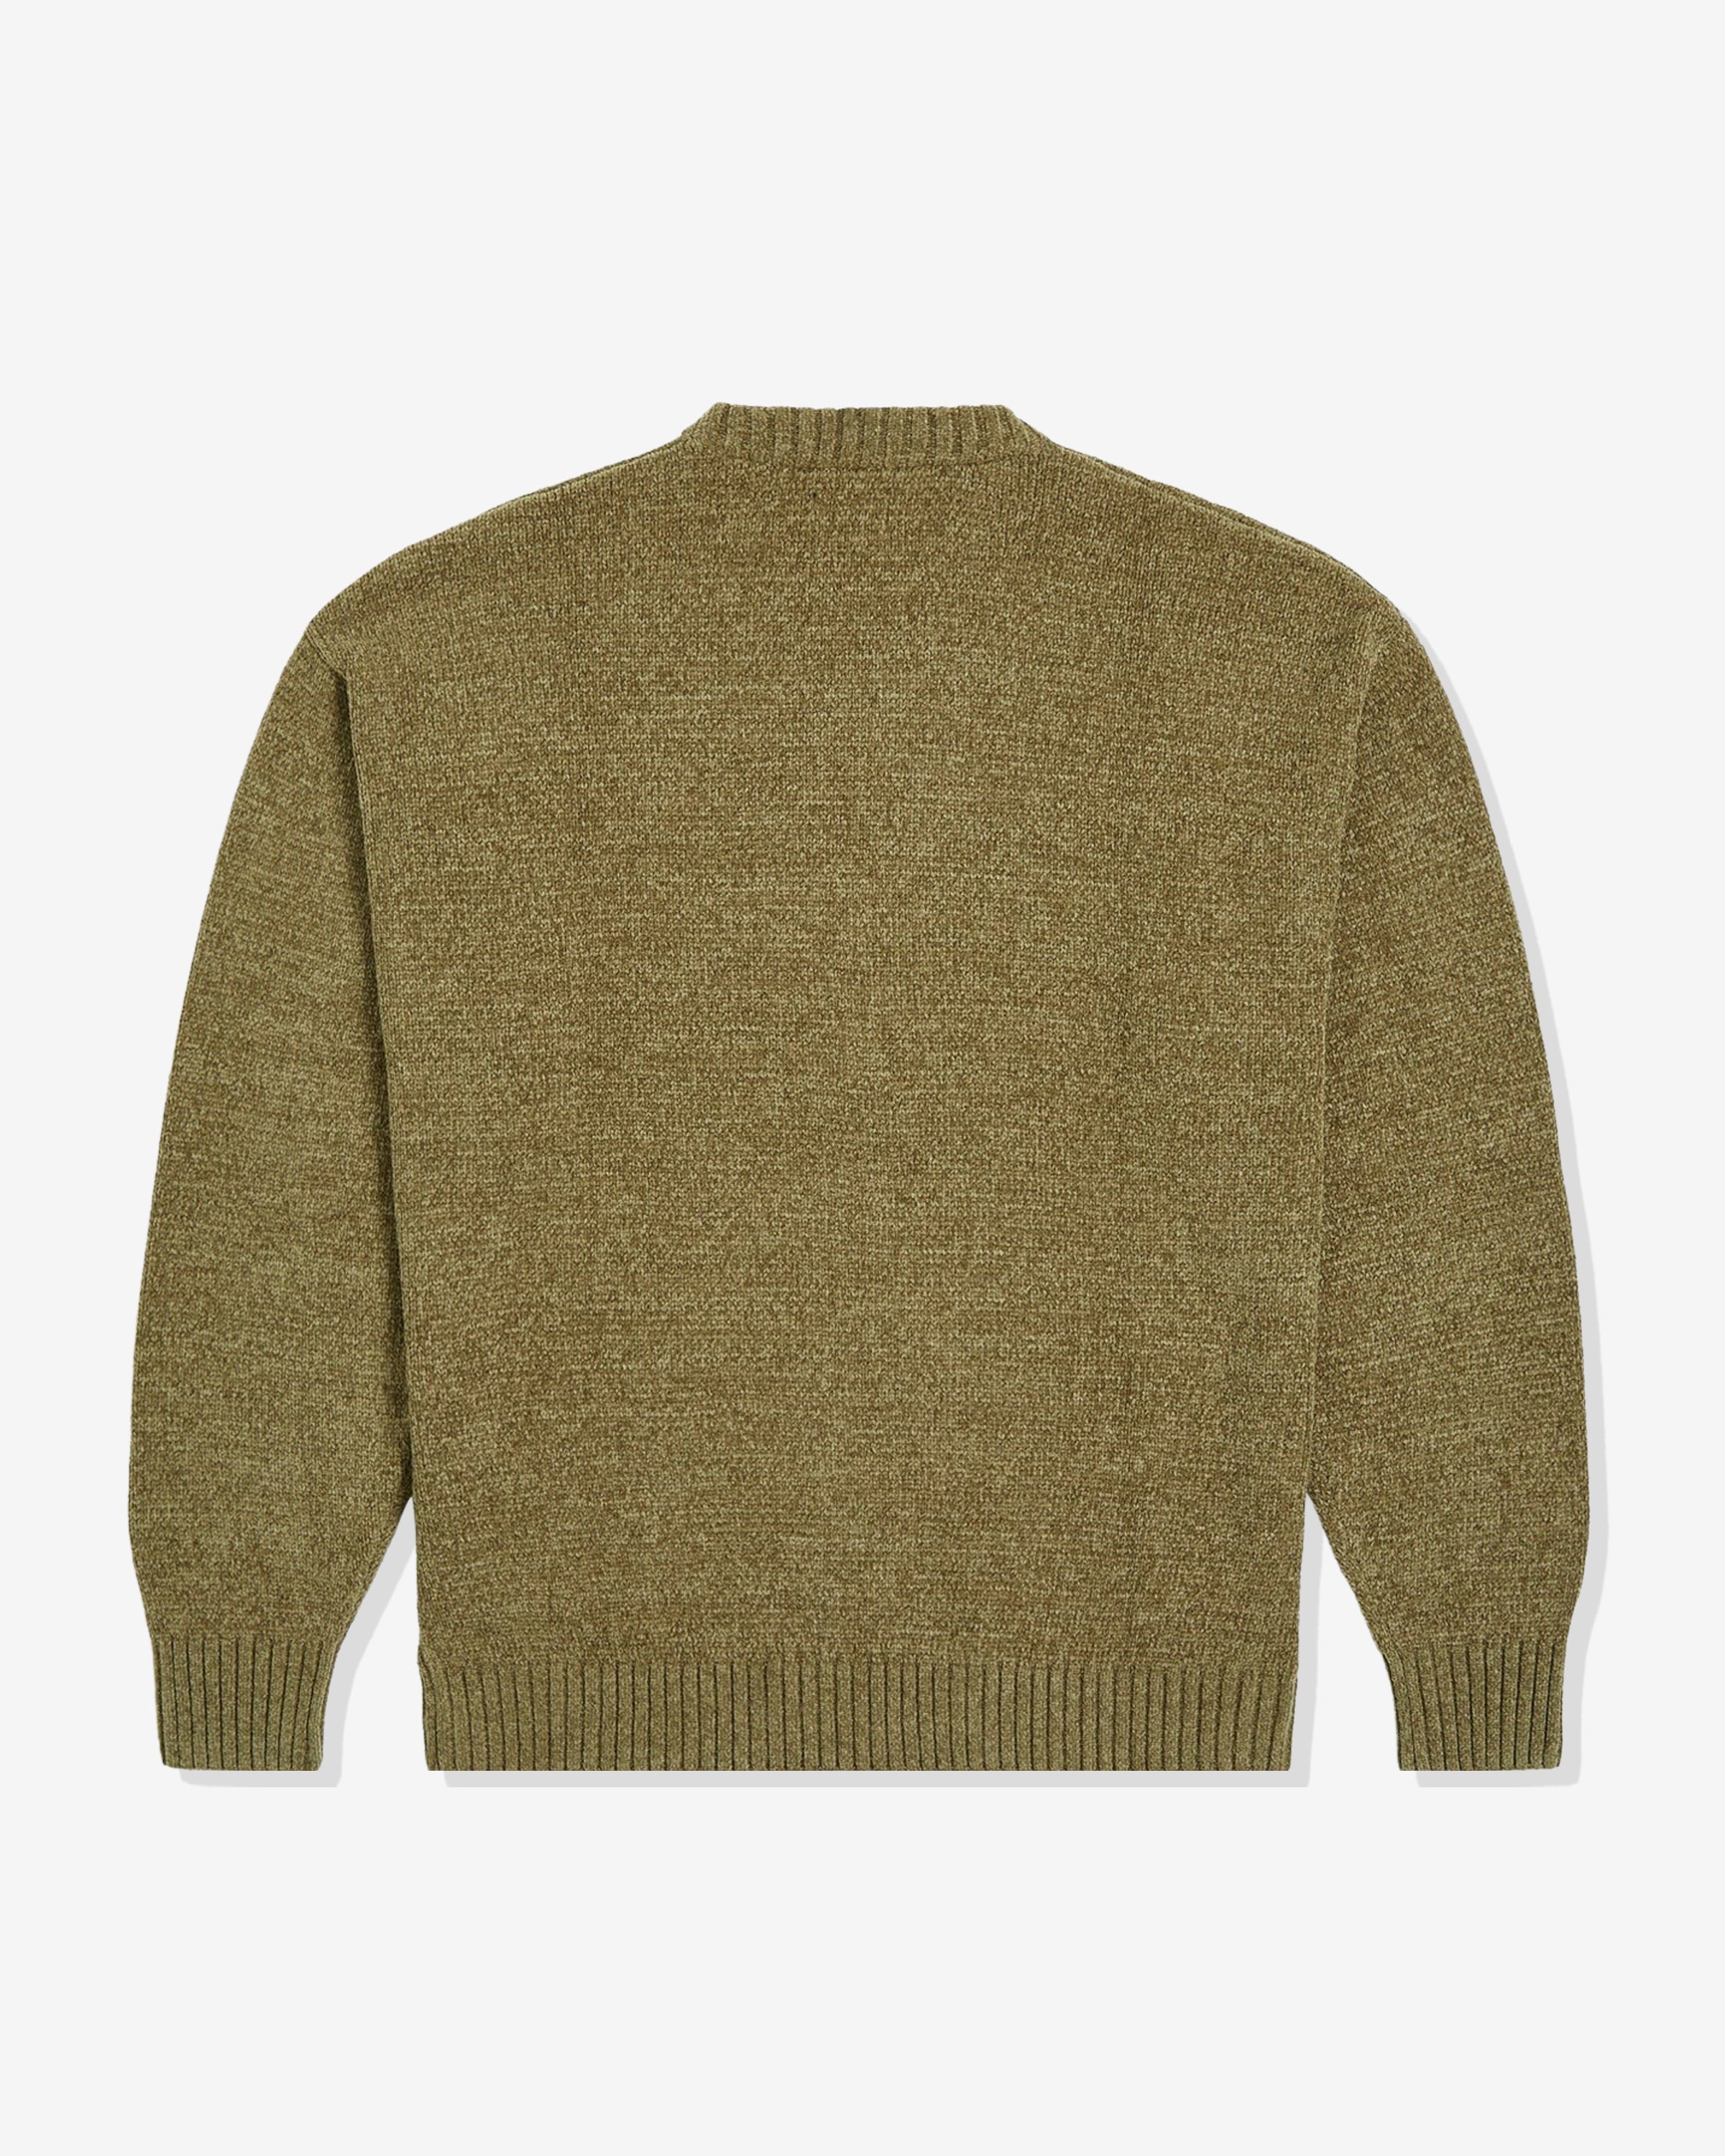 PATTA CHENILLE KNITTED SWEATER - SAGE